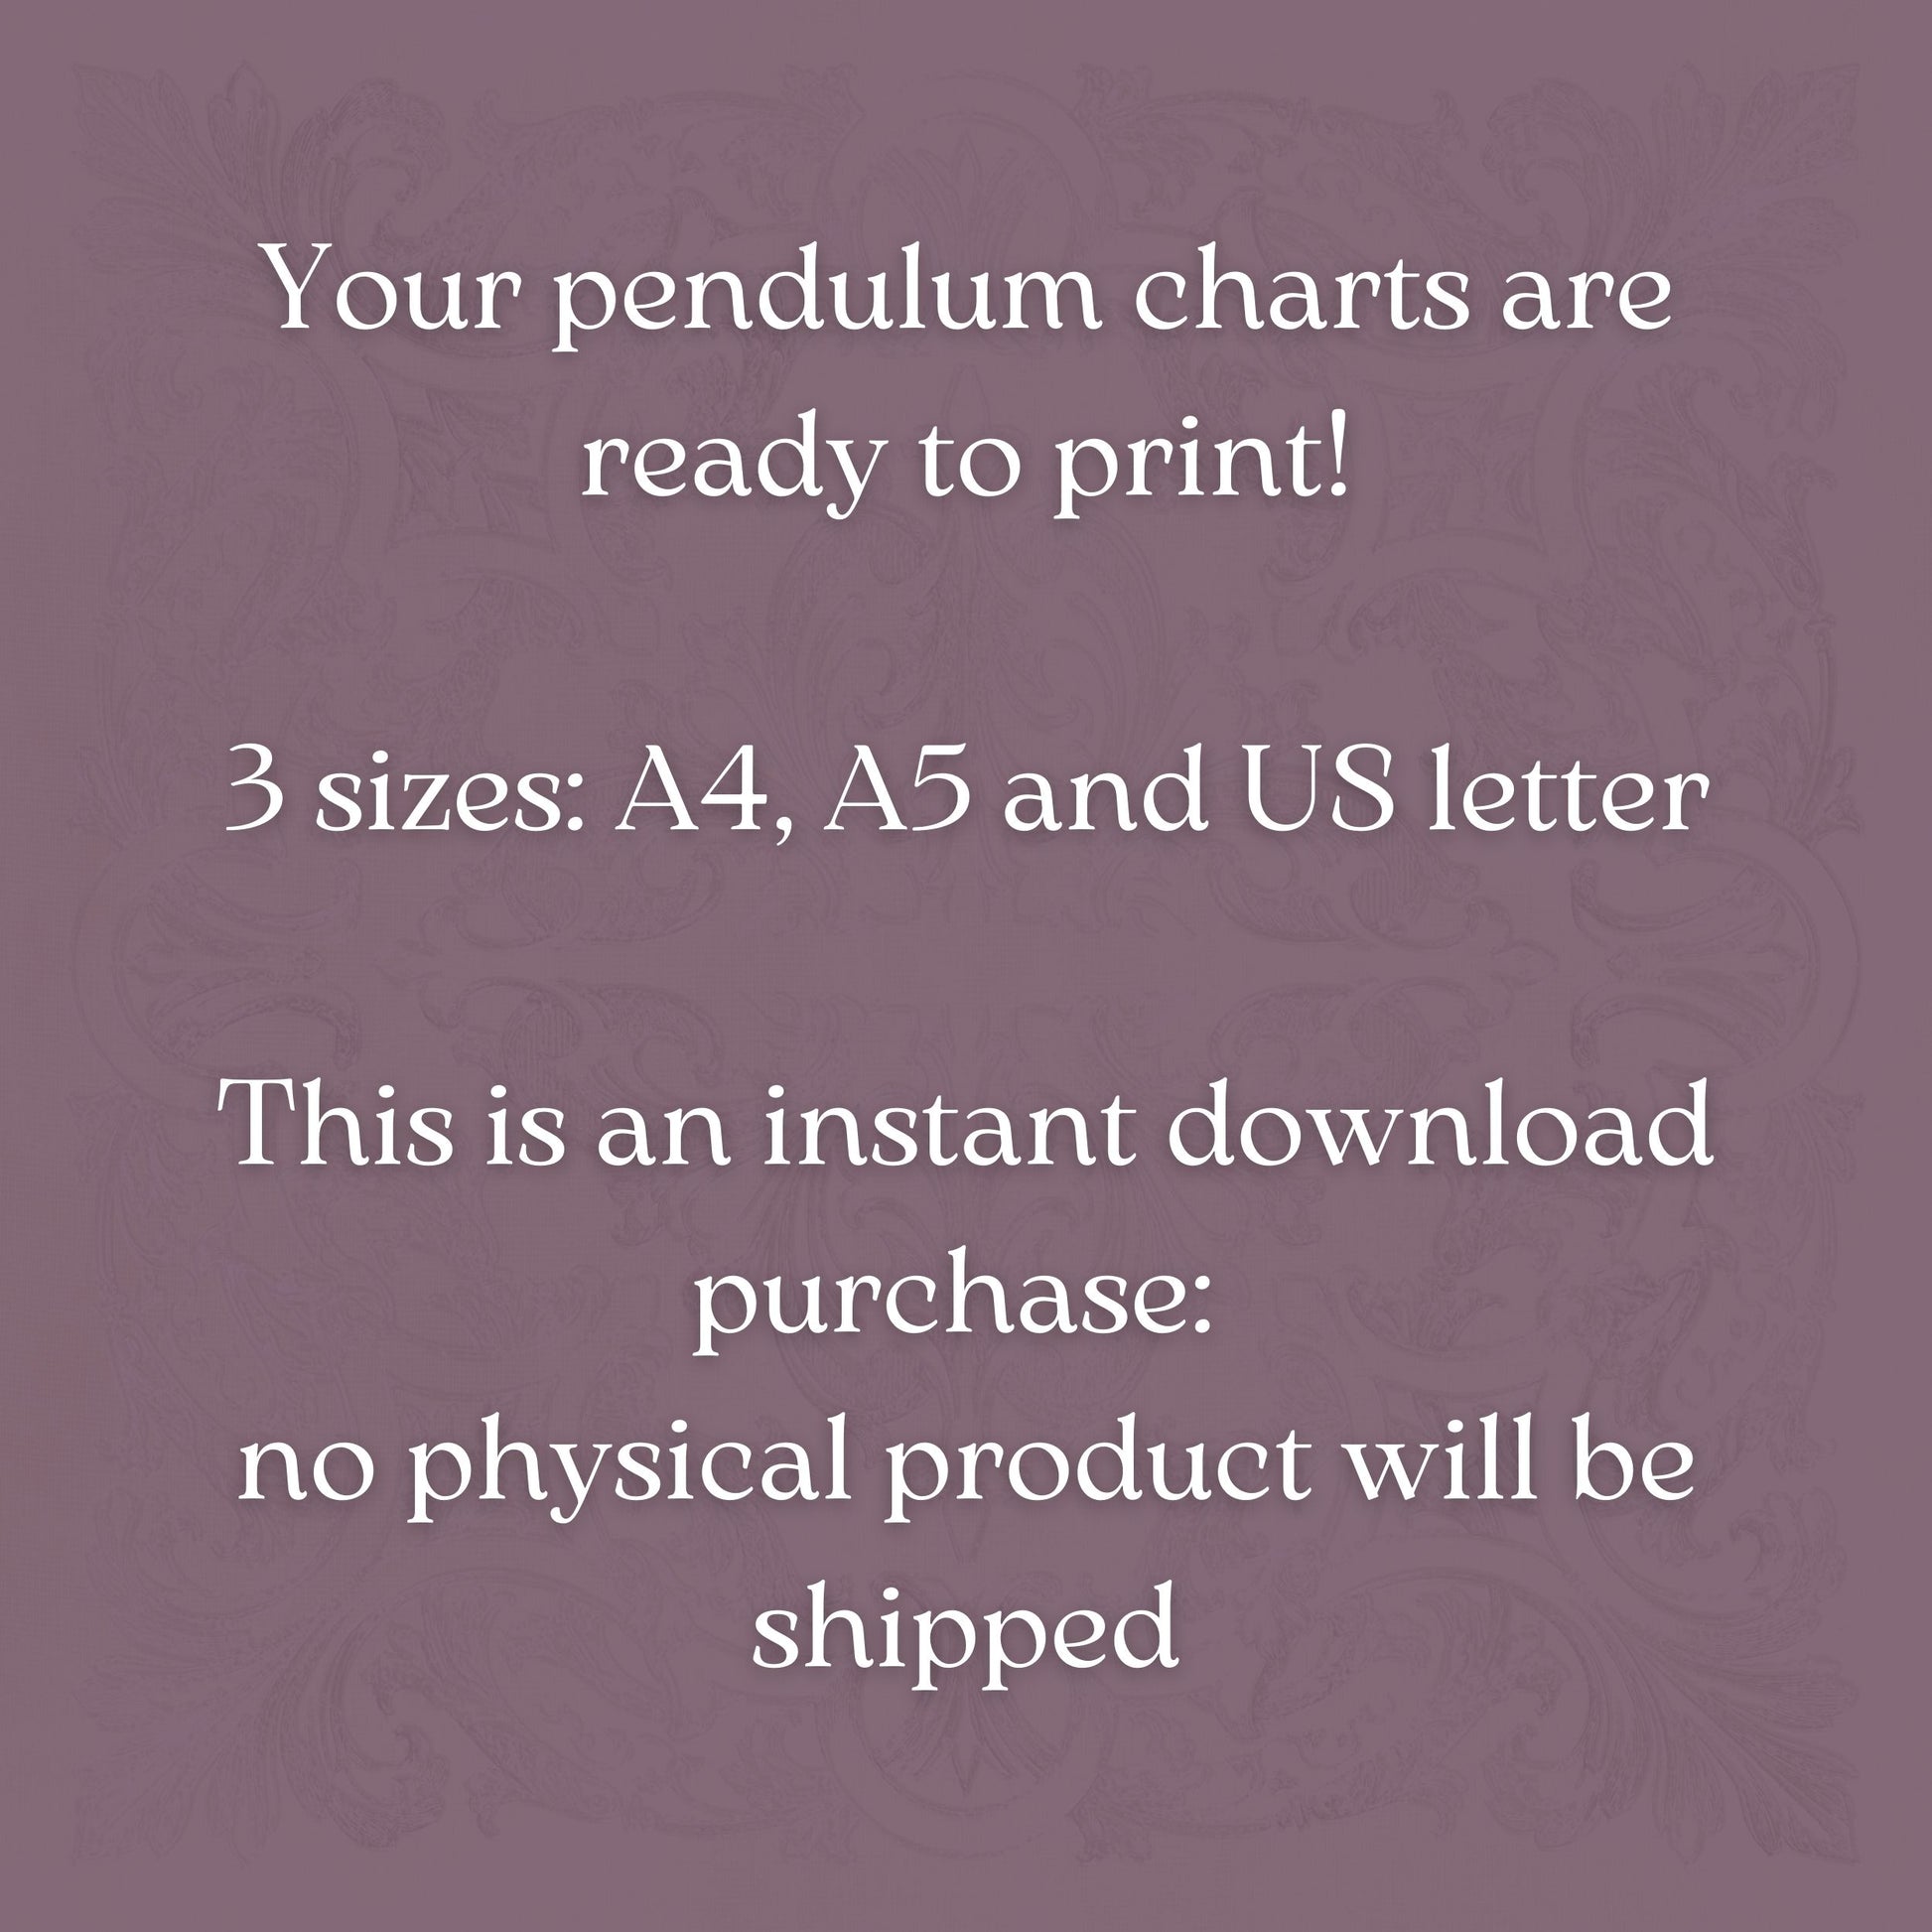 printable pendulum chart board for dowsing divination witch psychic metaphysical